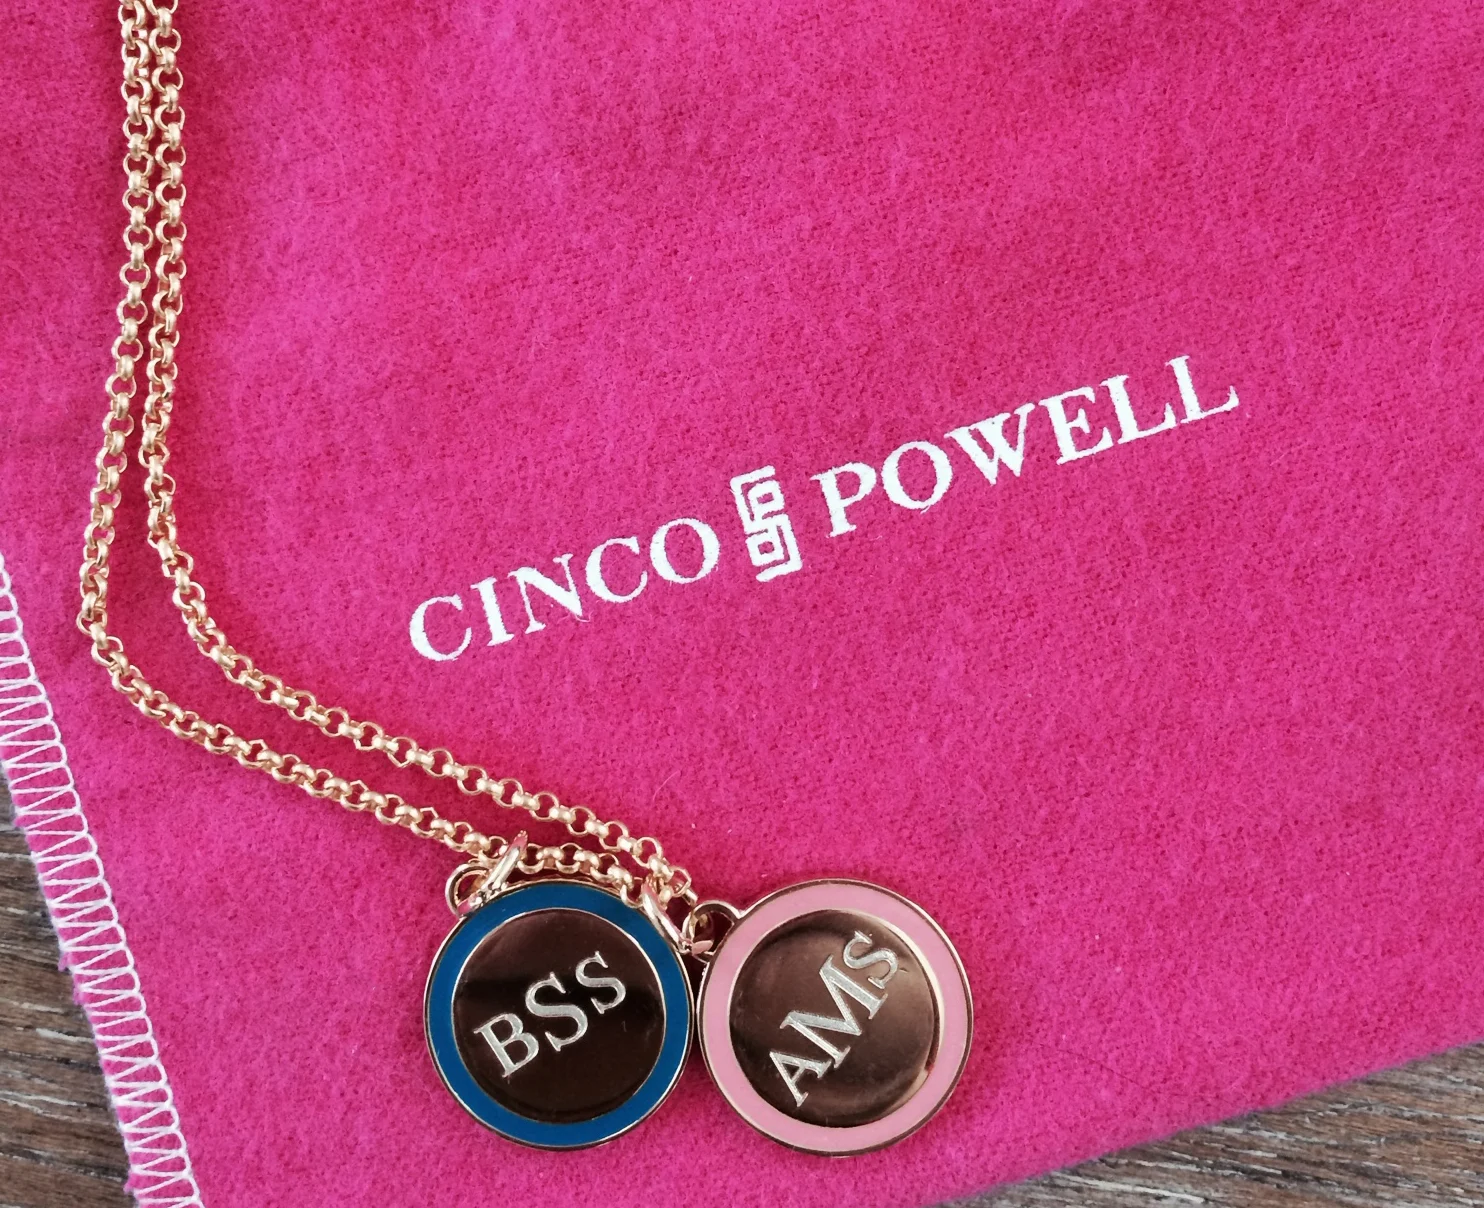 Mini Tag Necklace from Cinco Powell